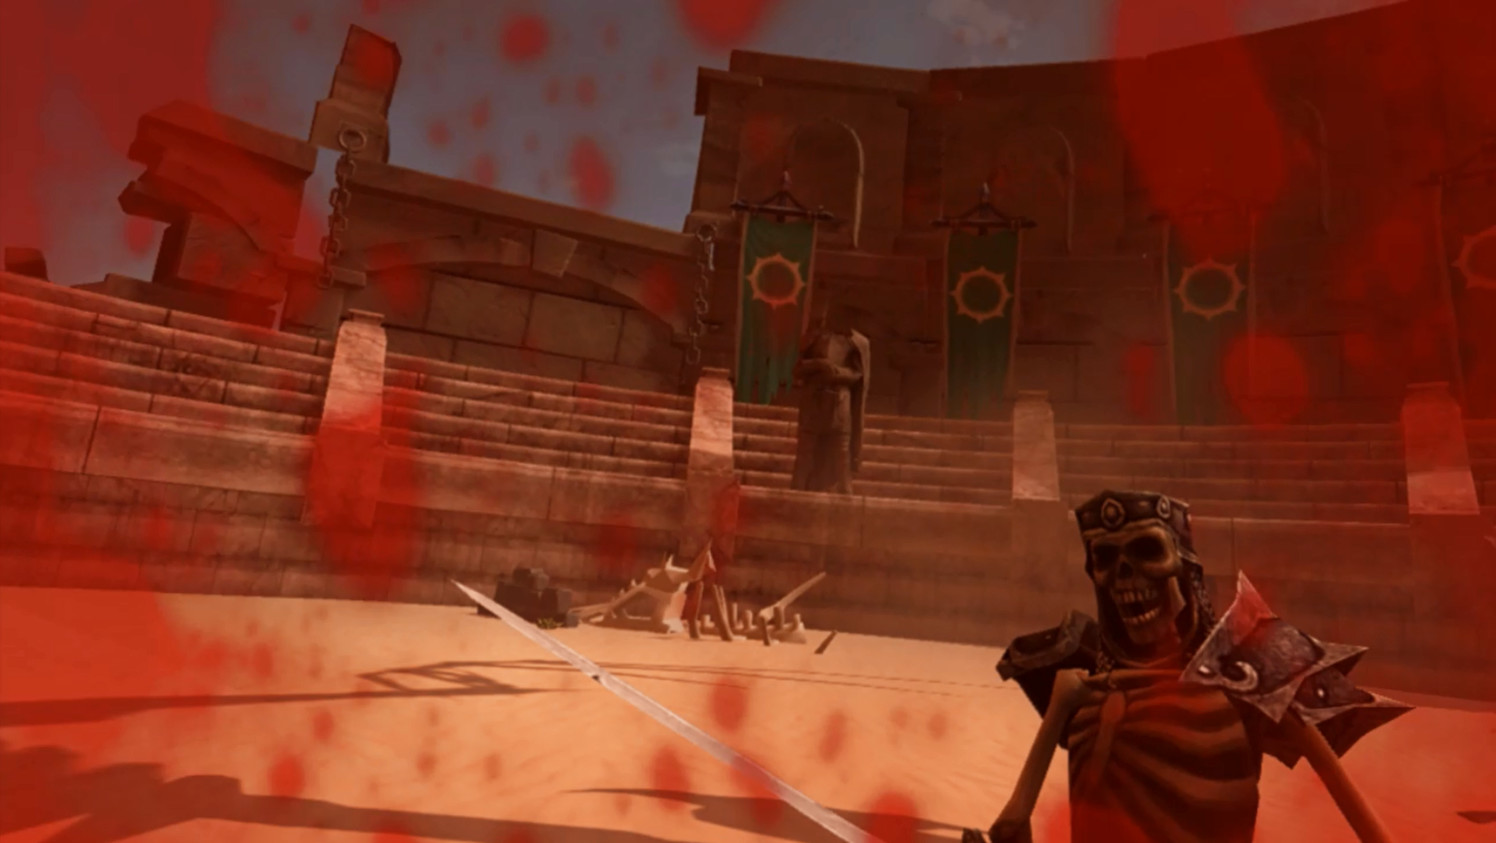 Arena: Blood on the Sand VR Steam CD Key 5.12 USD